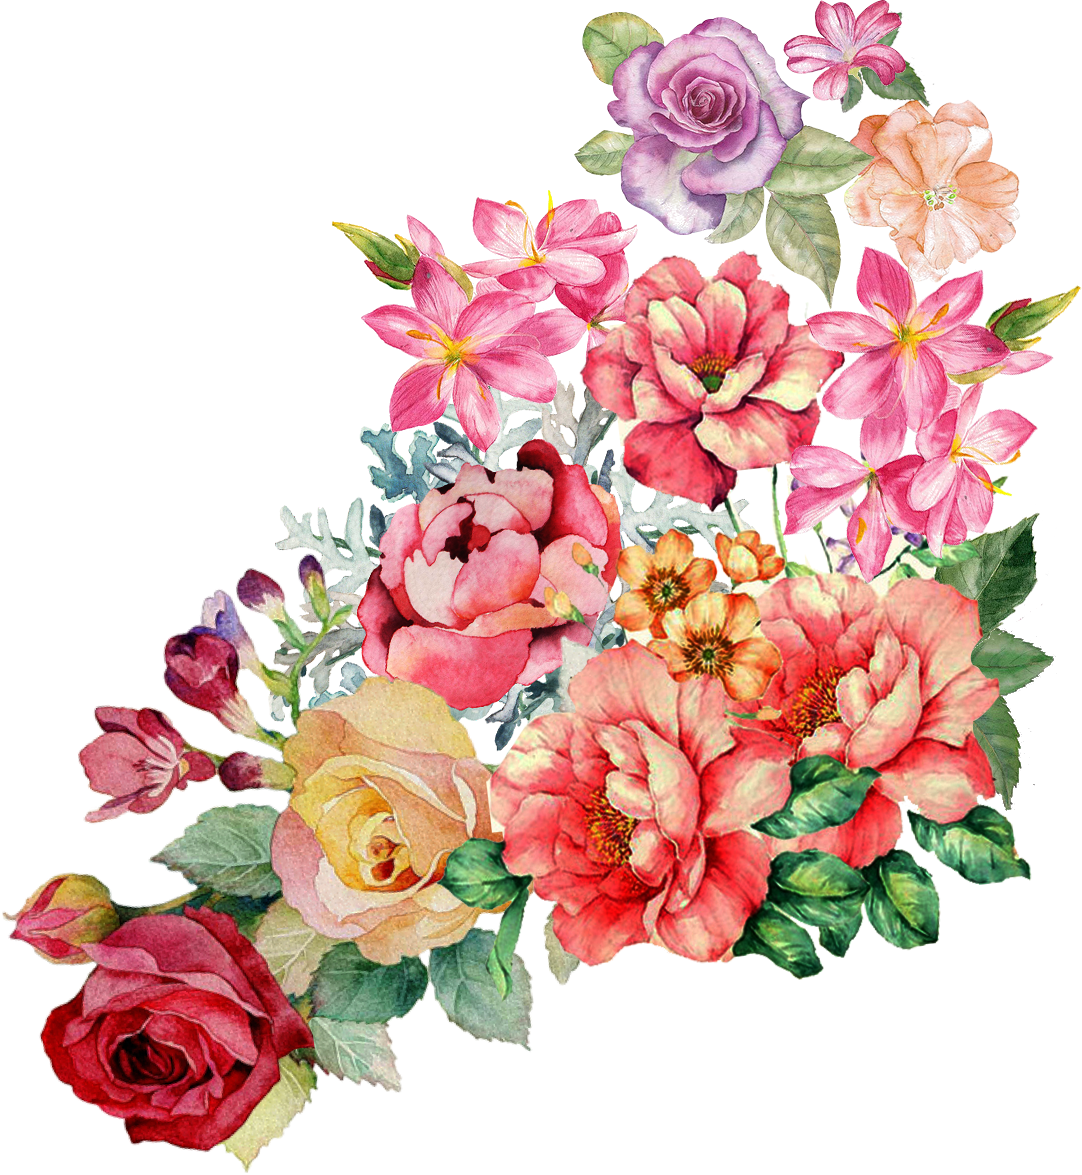 Colorful Rose Flower Bouquet Vector PNG